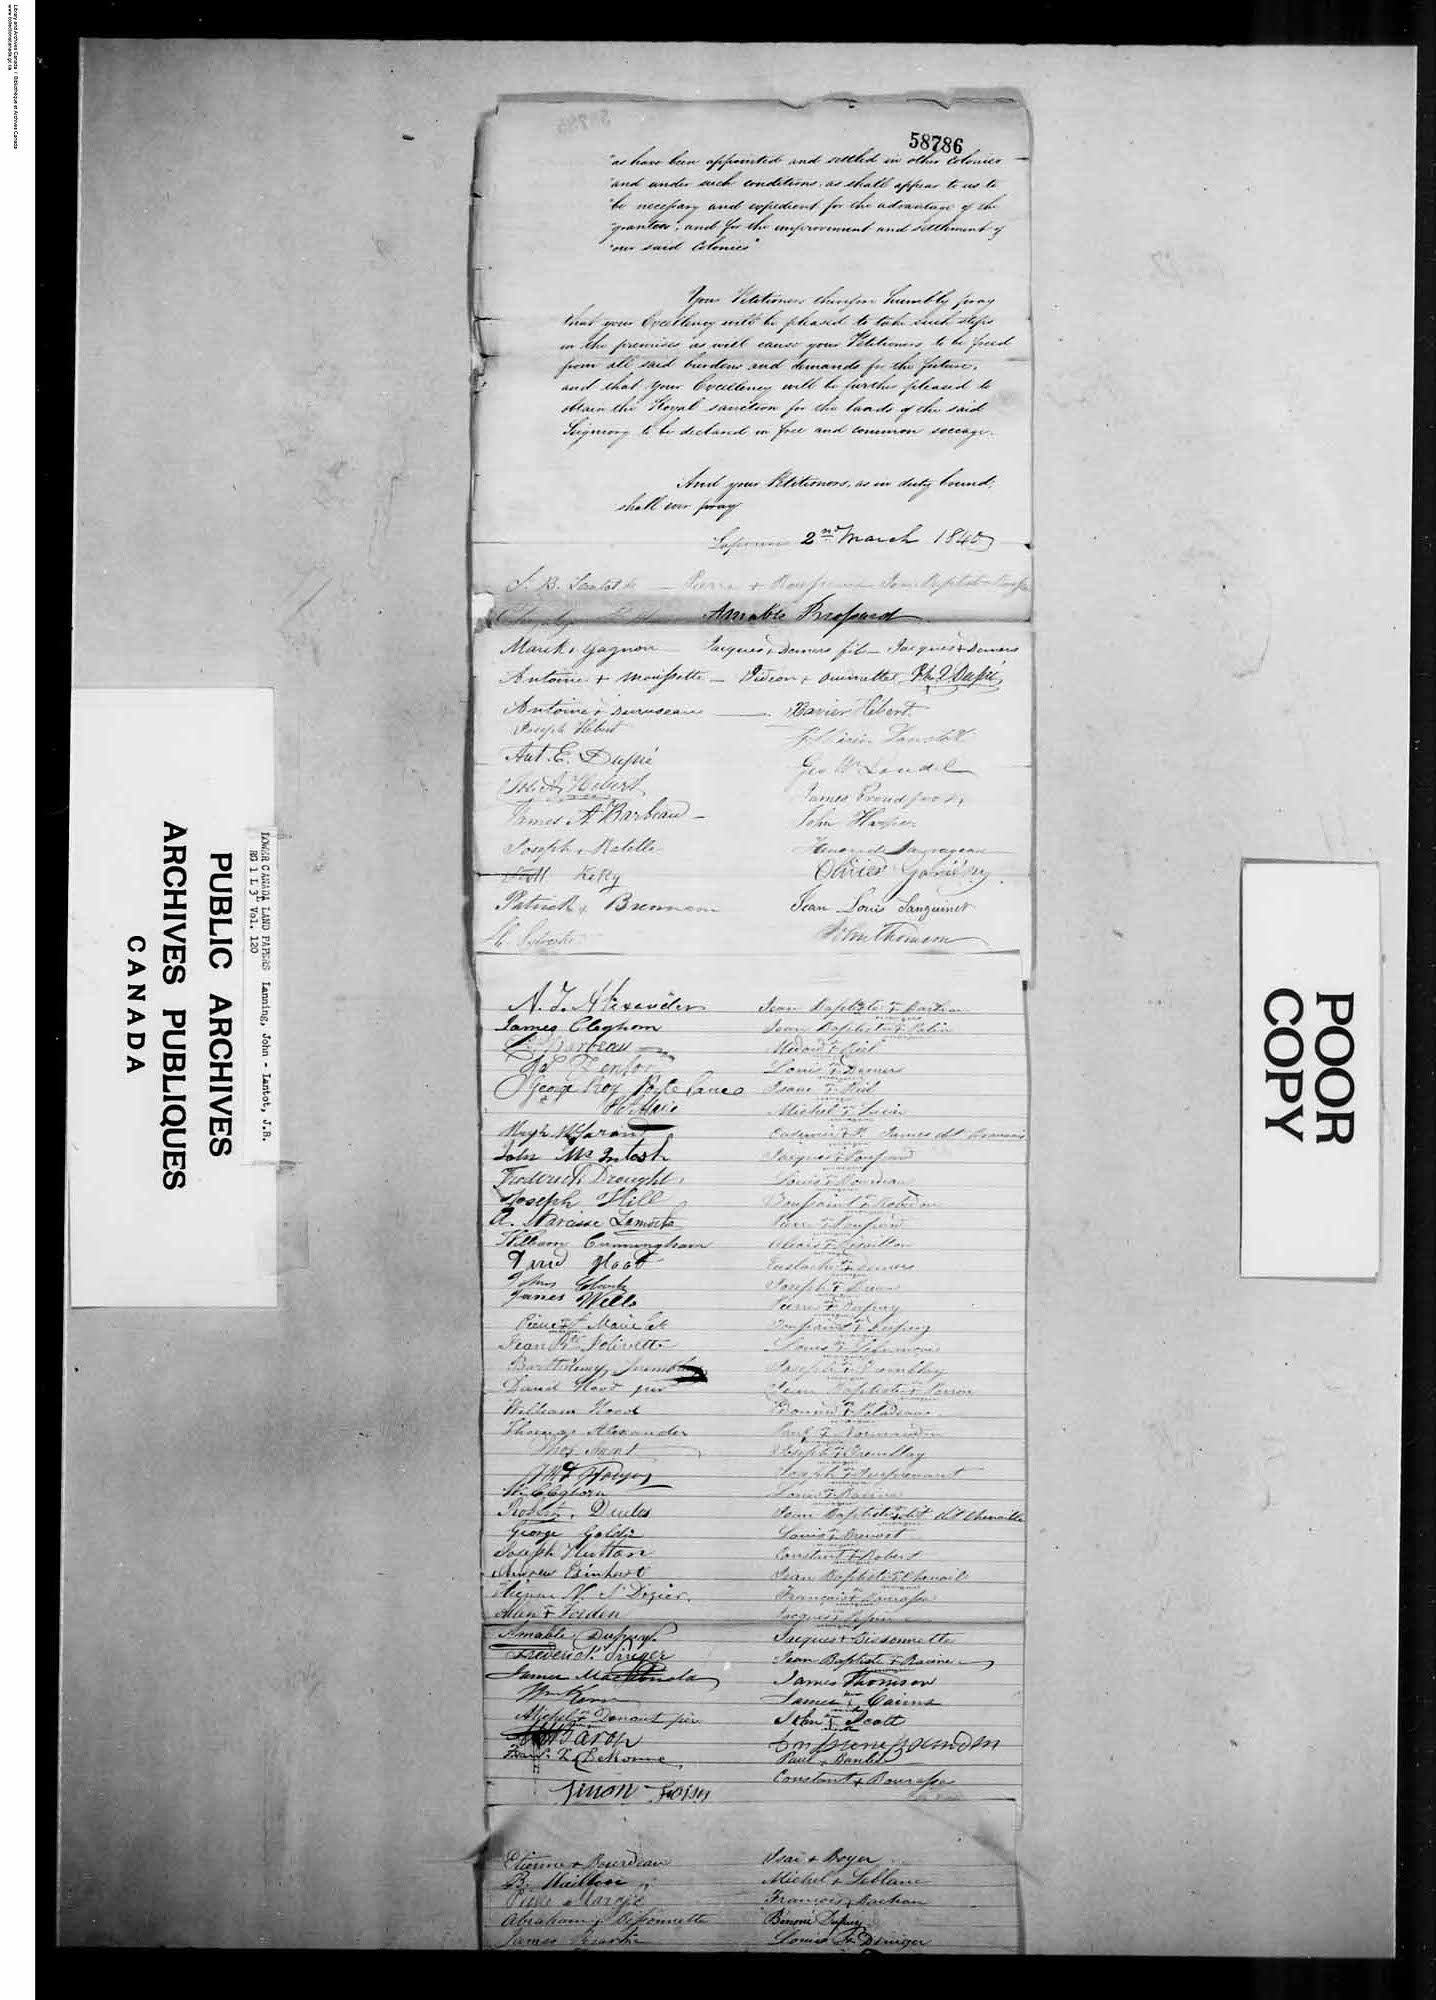 Digitized page of  for Image No.: e008703485